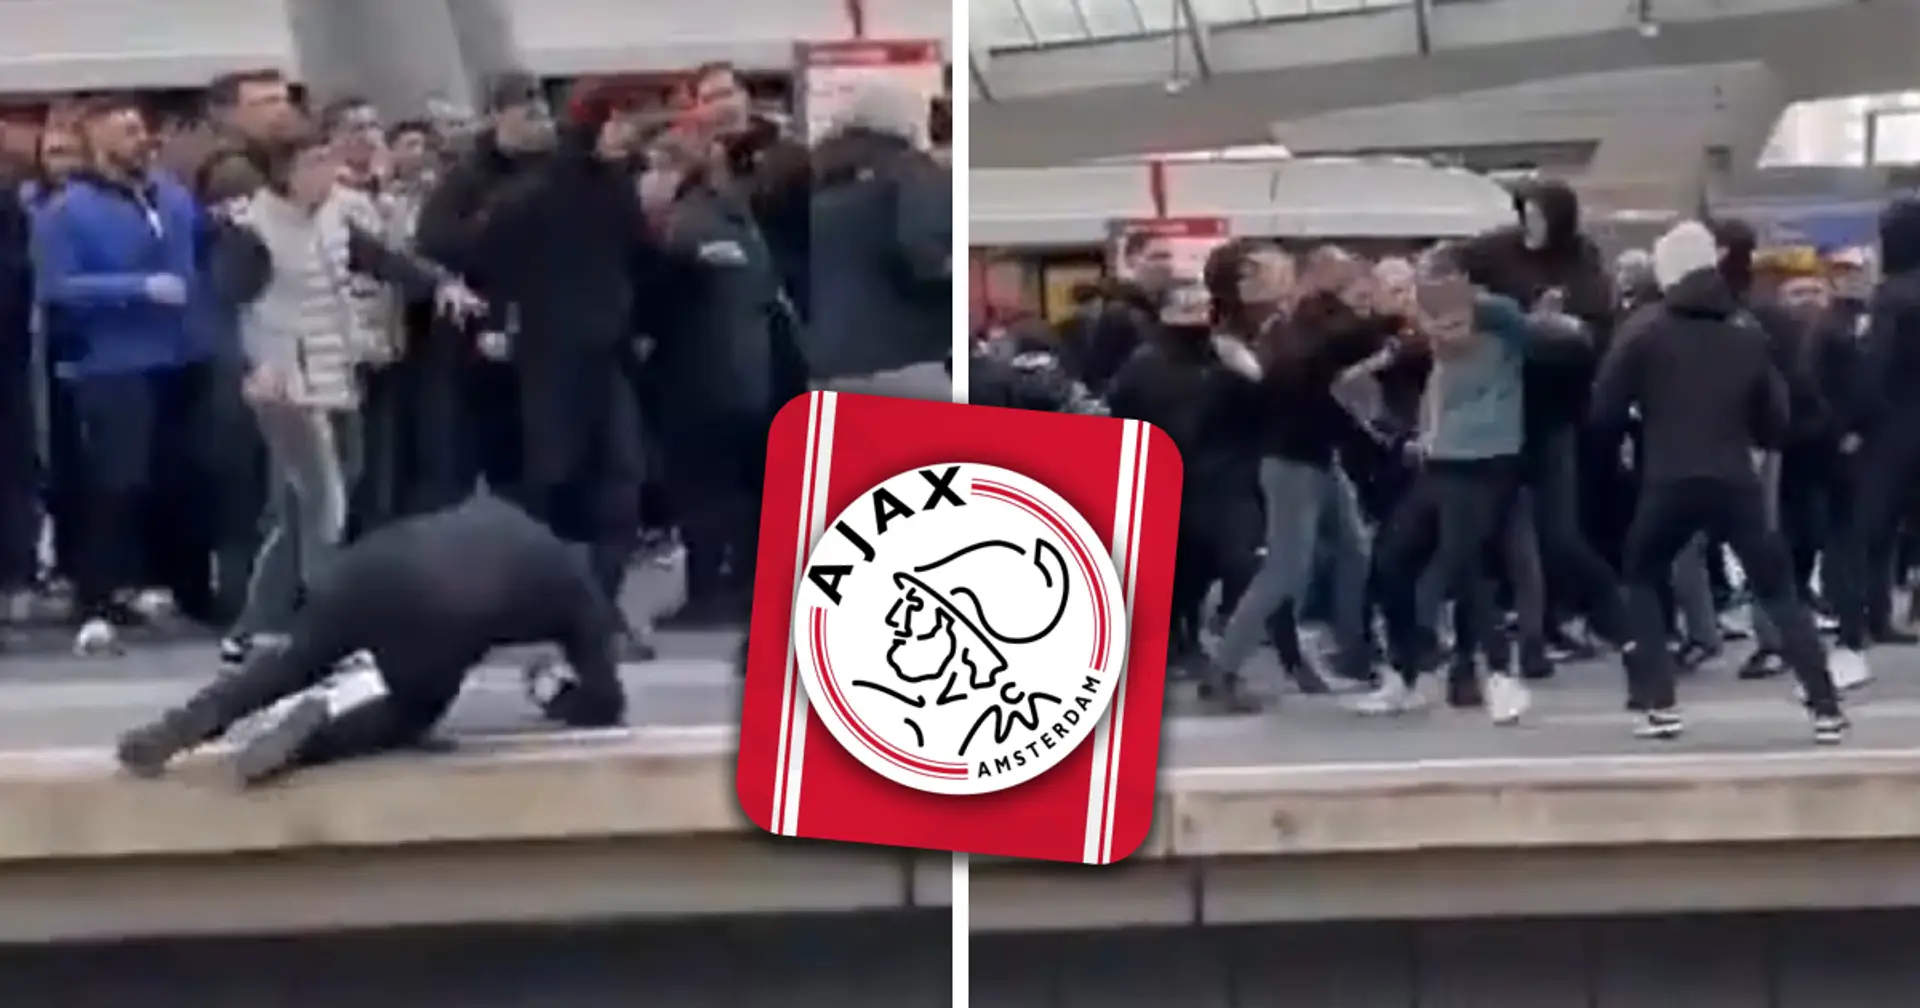 Footage emerges as Ajax hooligans allegedly attack Aston Villa fans at a train station